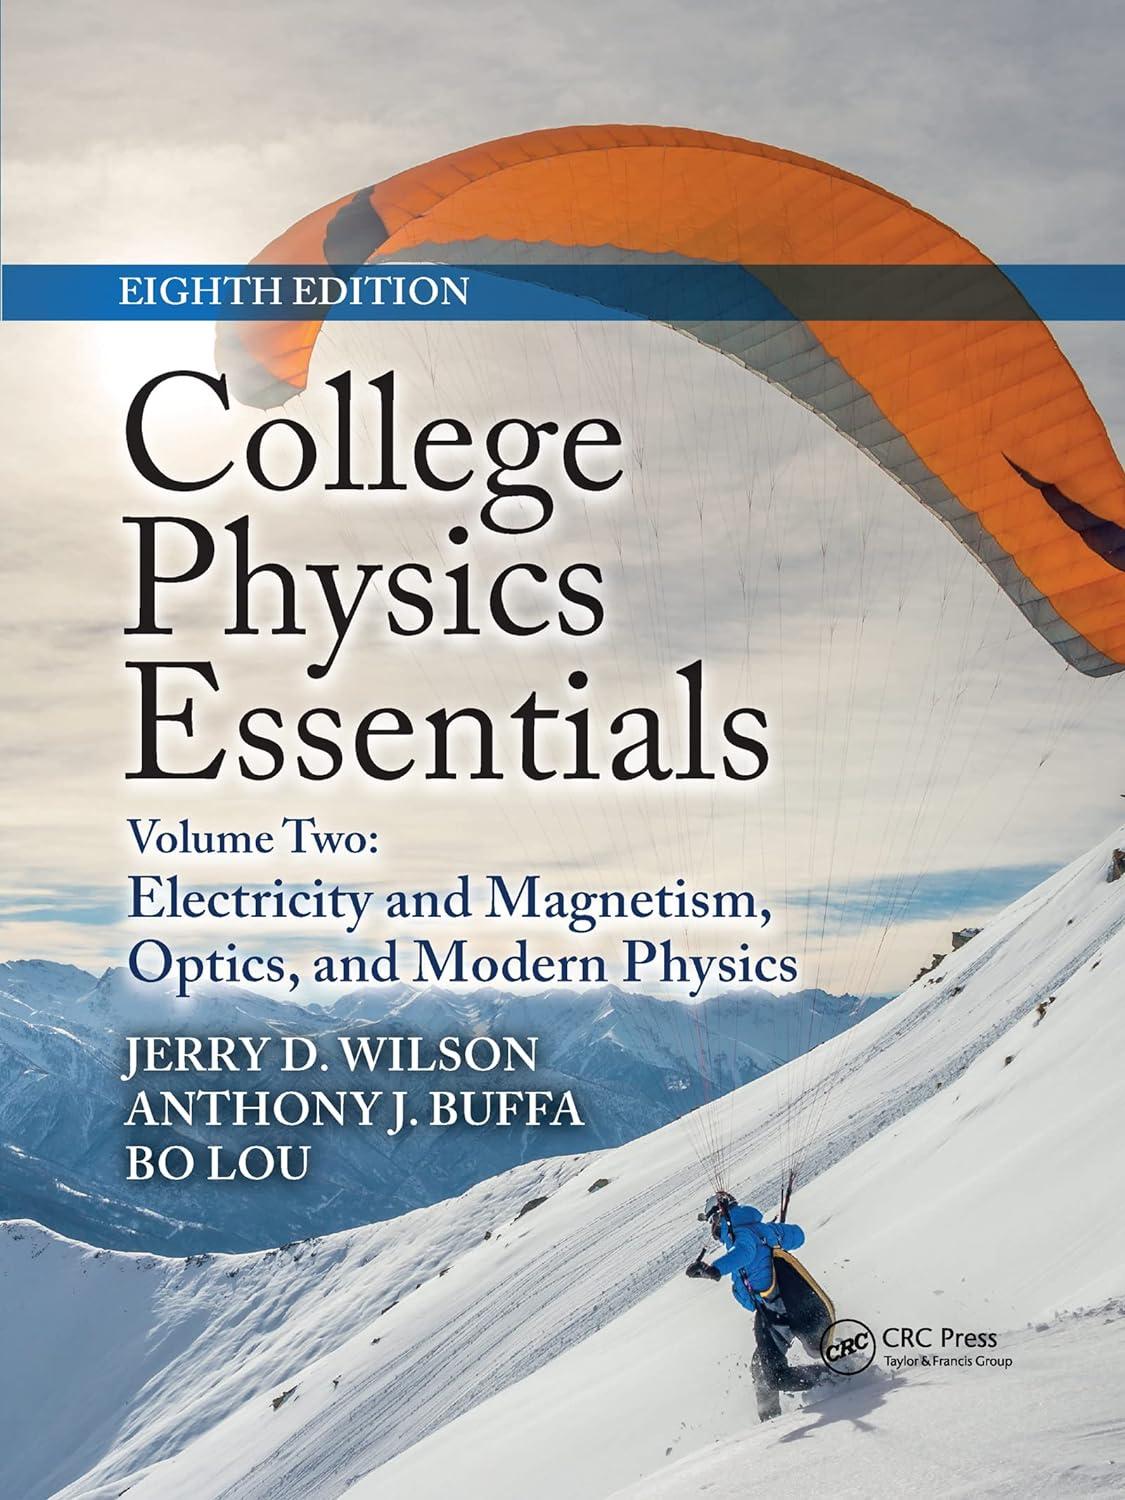 College Physics Essentials Electricity And Magnetism Optics Modern Physics Volume Two